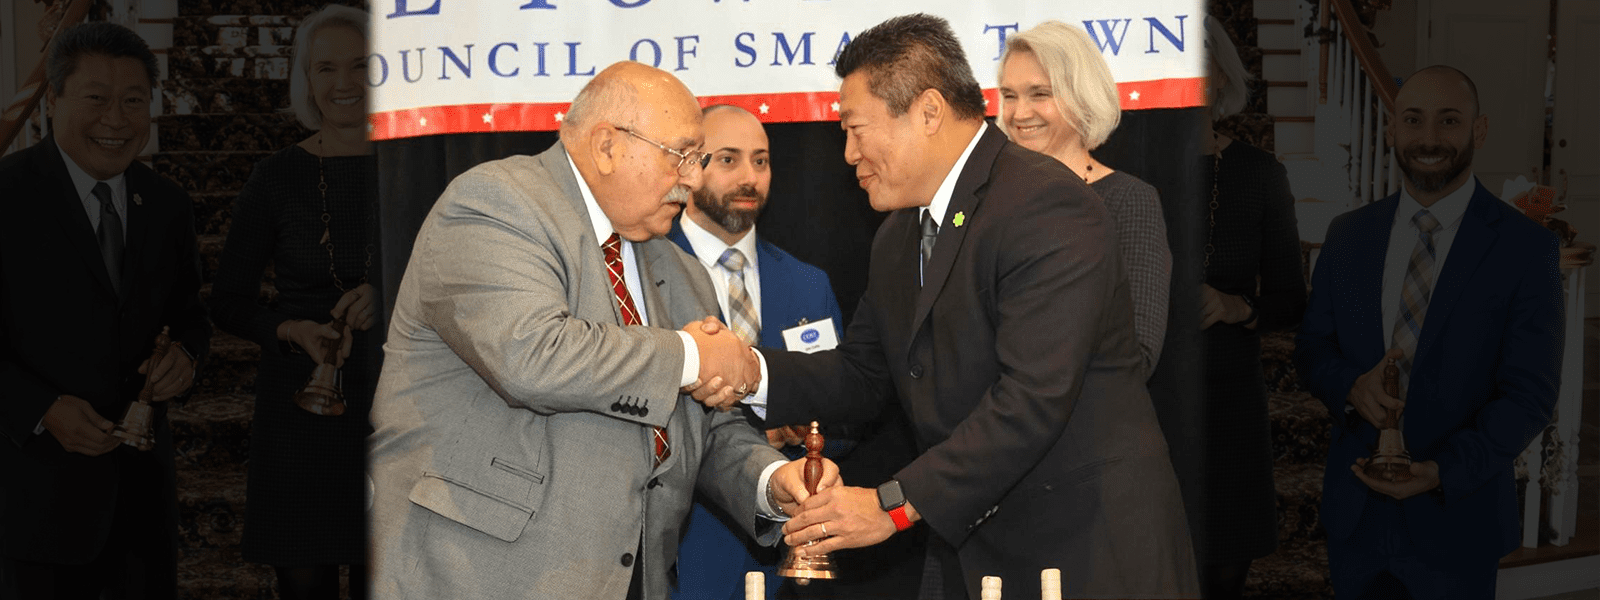 Sen. Tony Hwang Receives “Town Crier” Award for His Advocacy of CT’s Small Communities